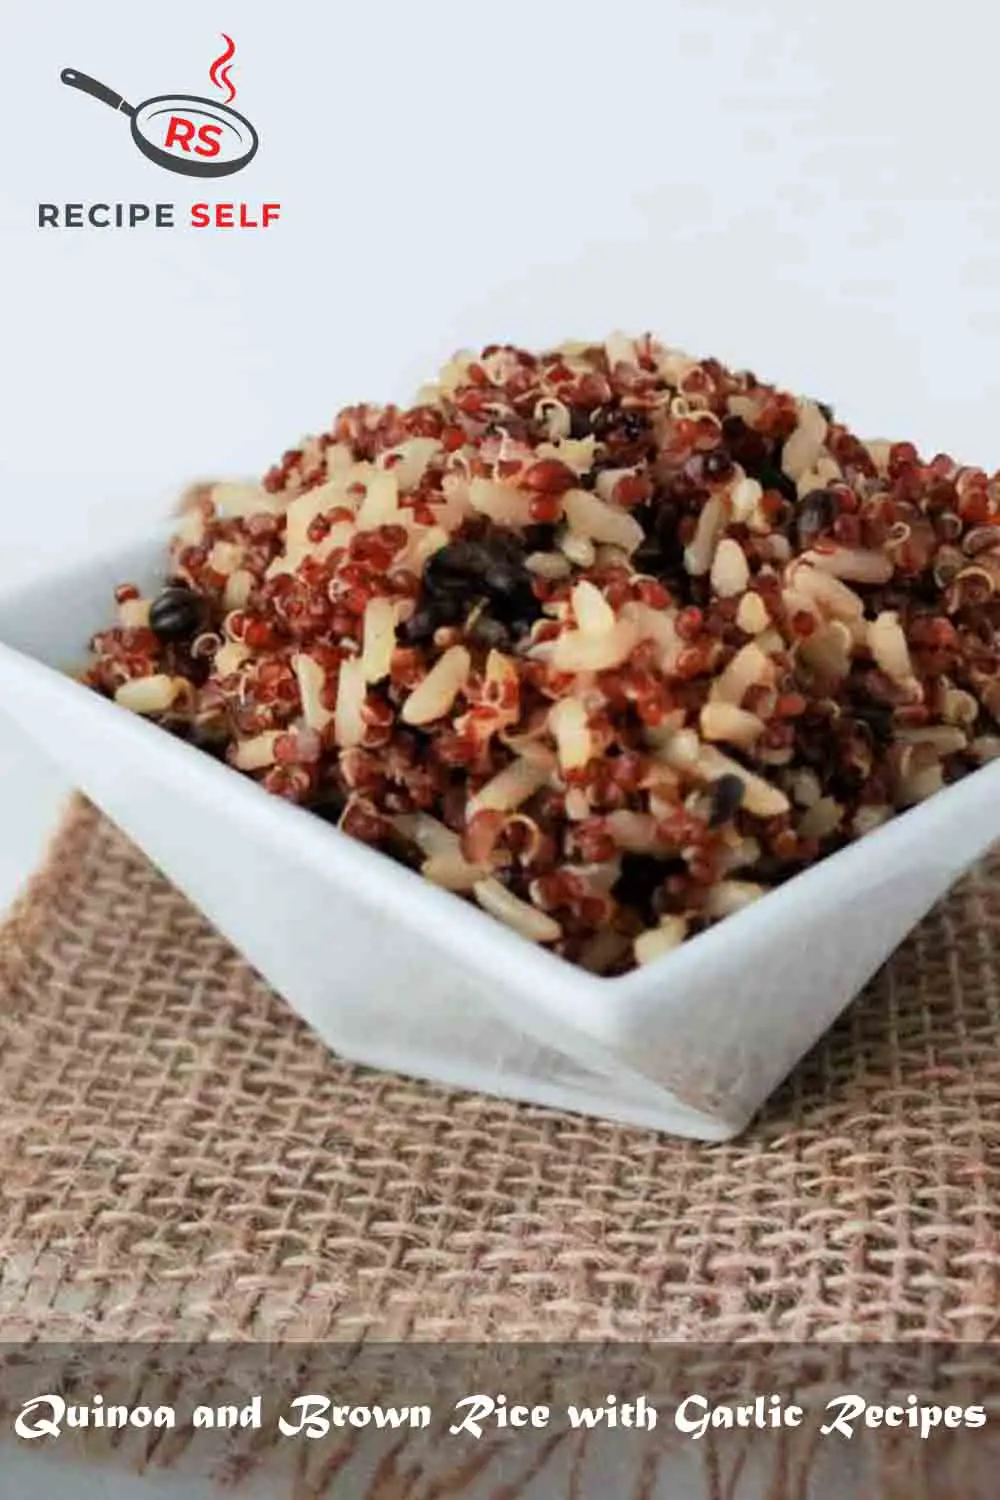 Quinoa and Brown Rice with Garlic Recipes